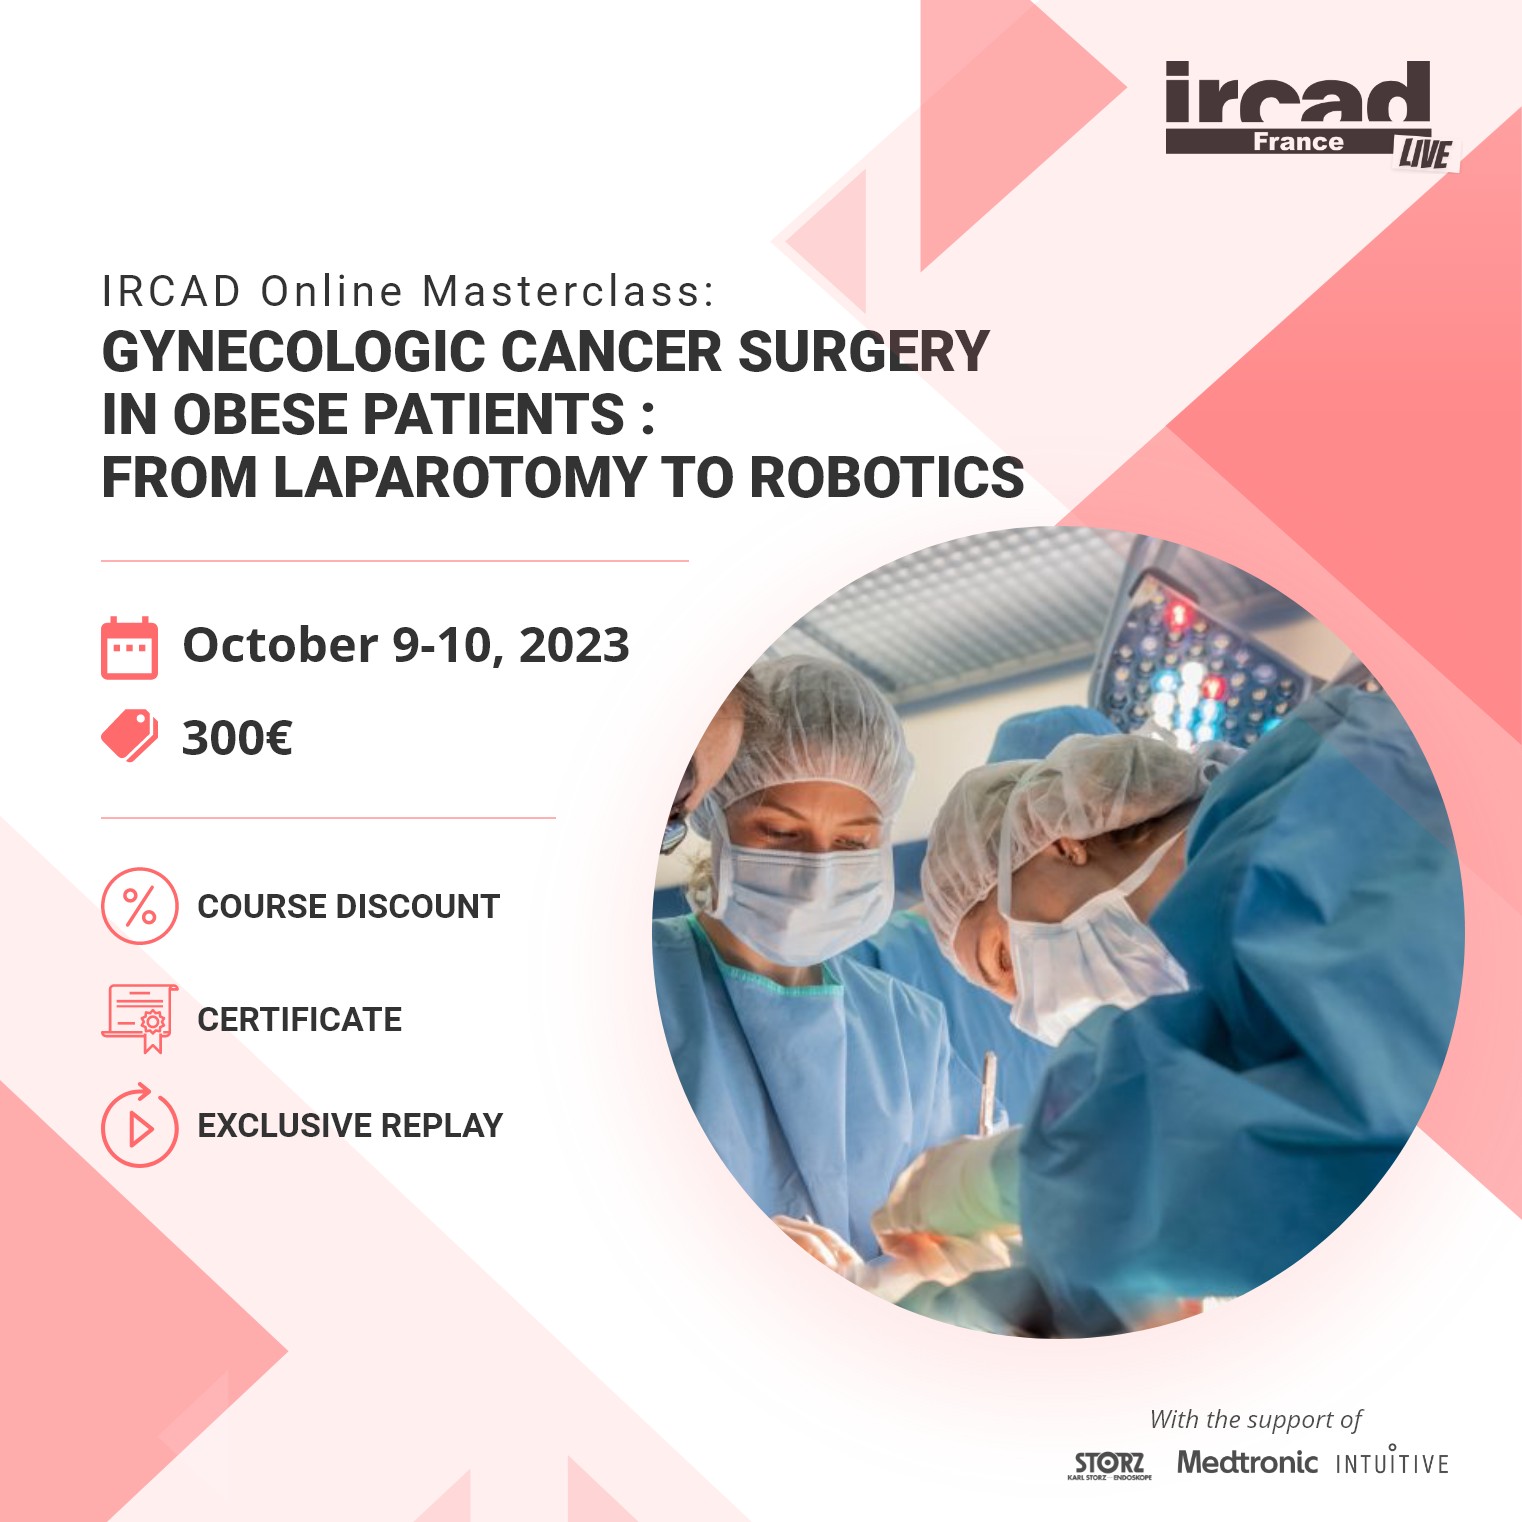 IRCAD Online Masterclass – Gynecologic cancer surgery in obese patients